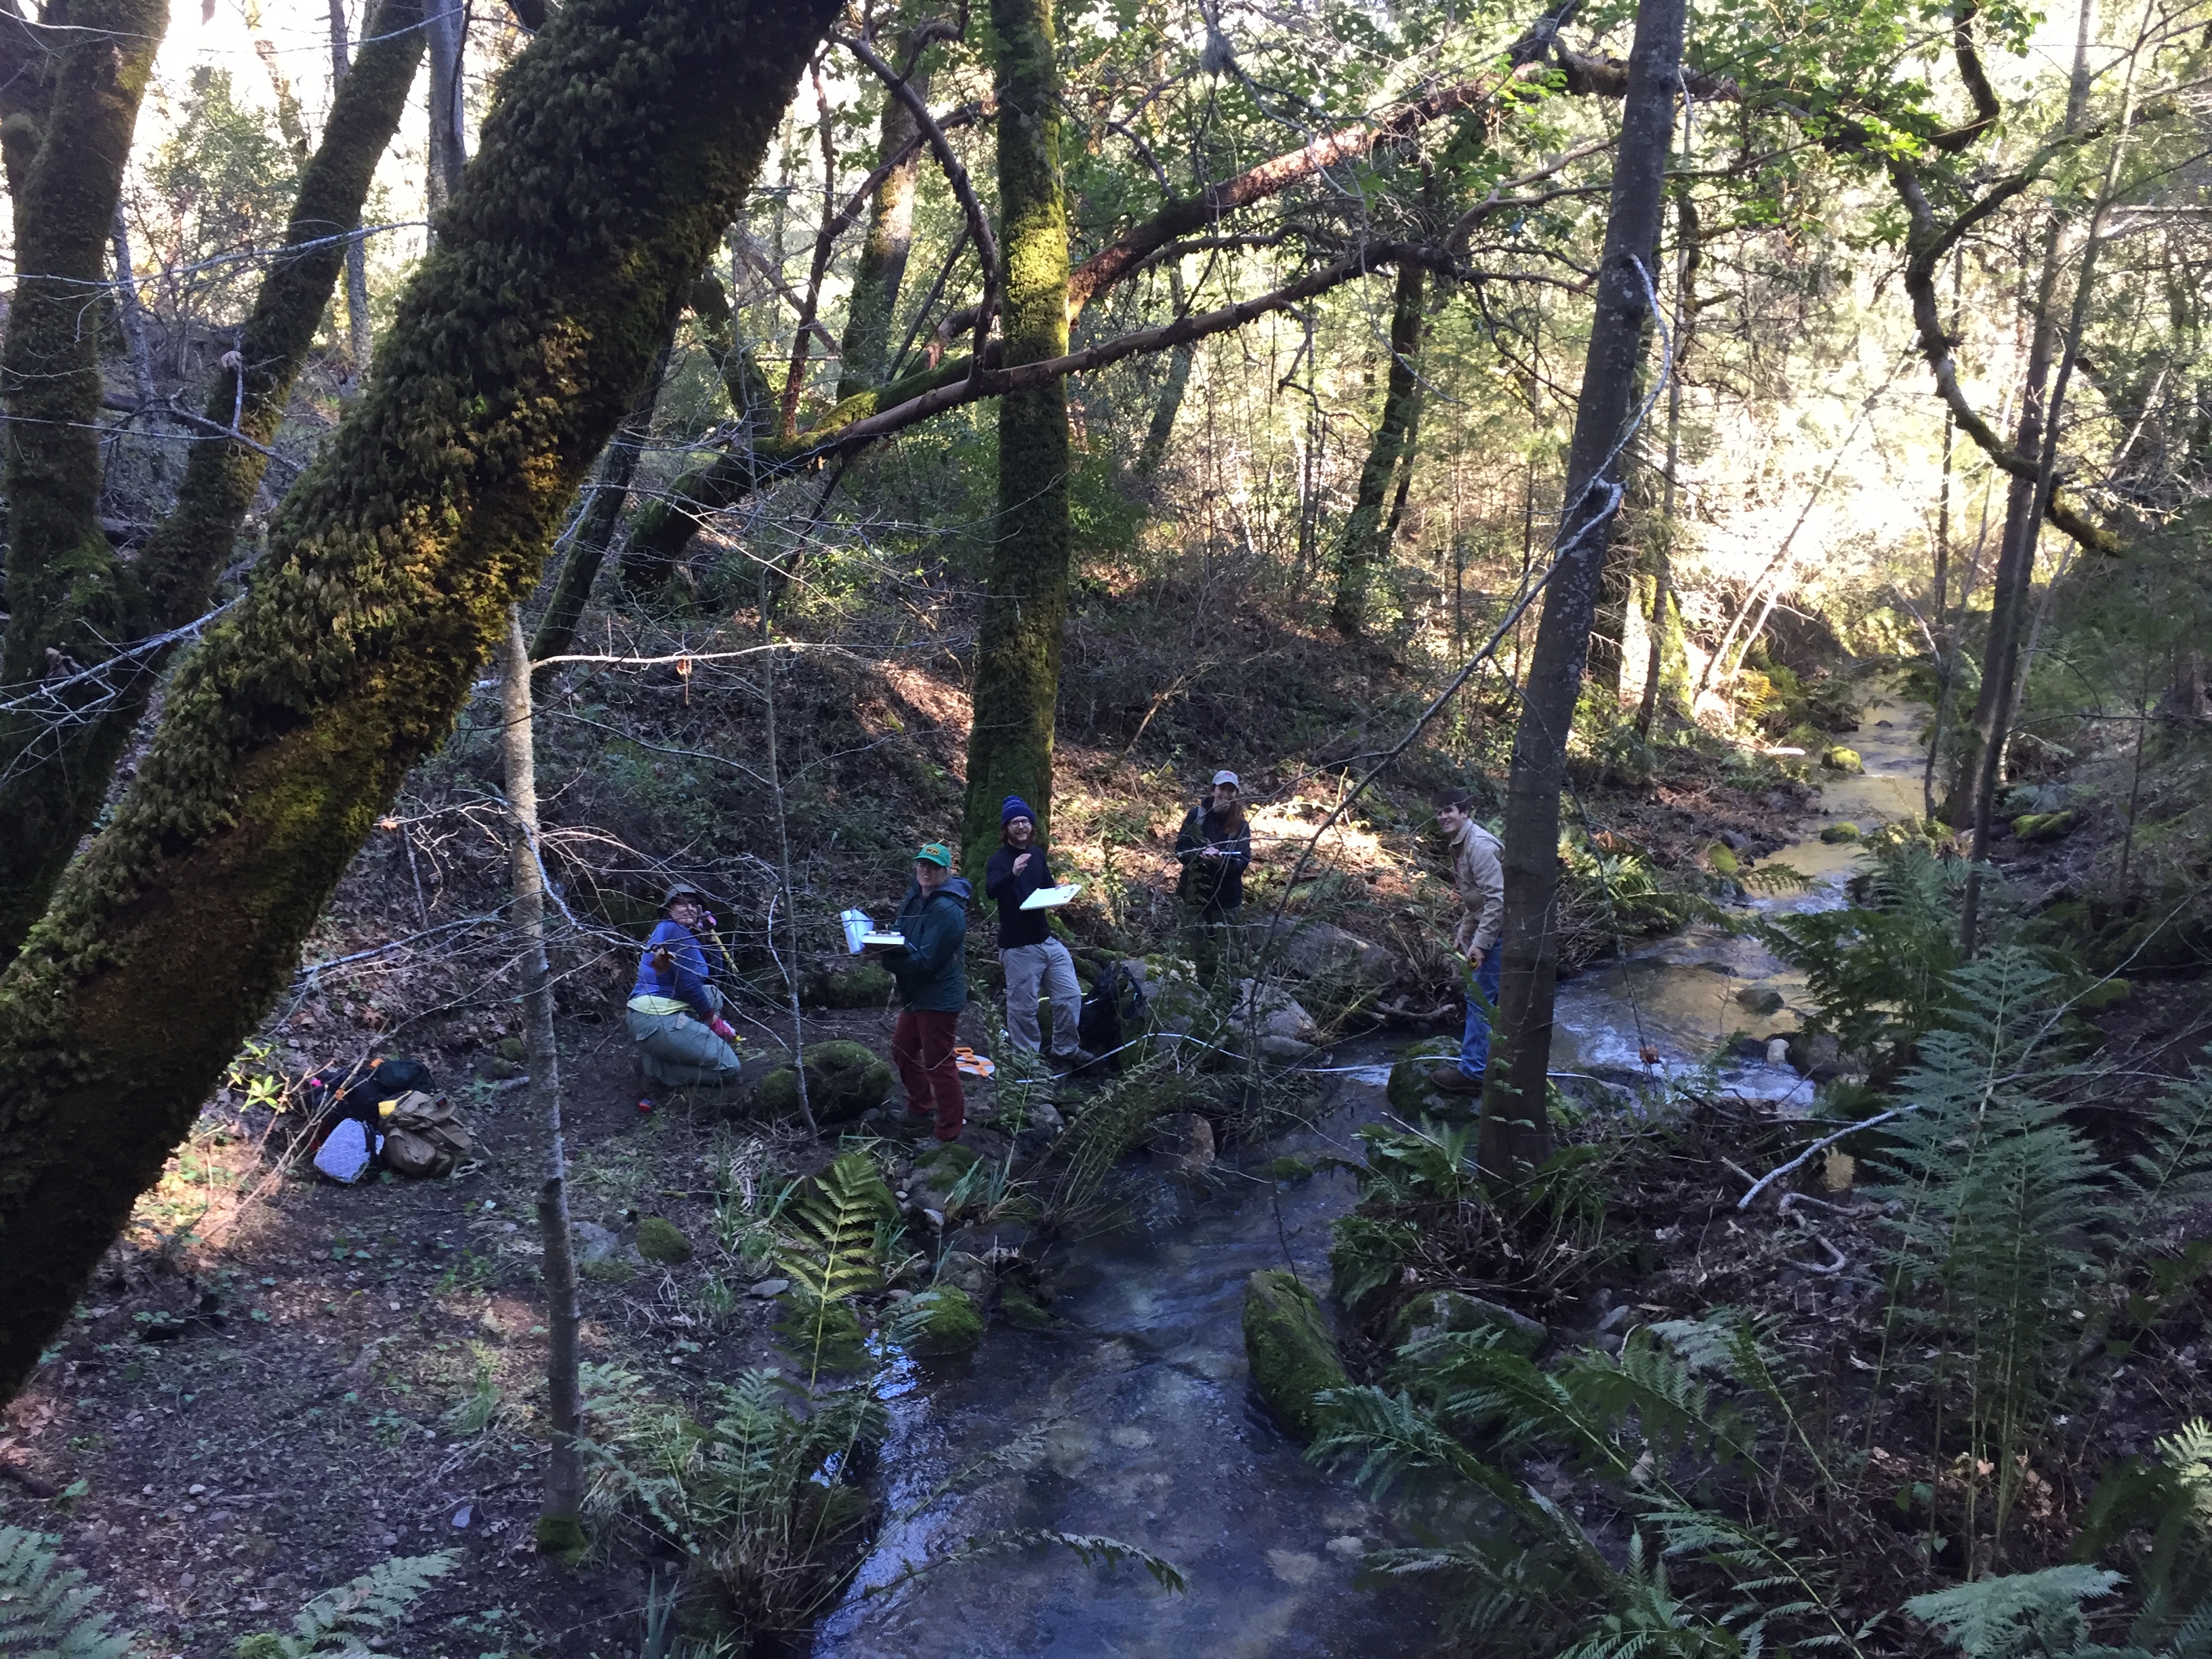 Spring 2019 interns recording a site at Las Posadas State Forest